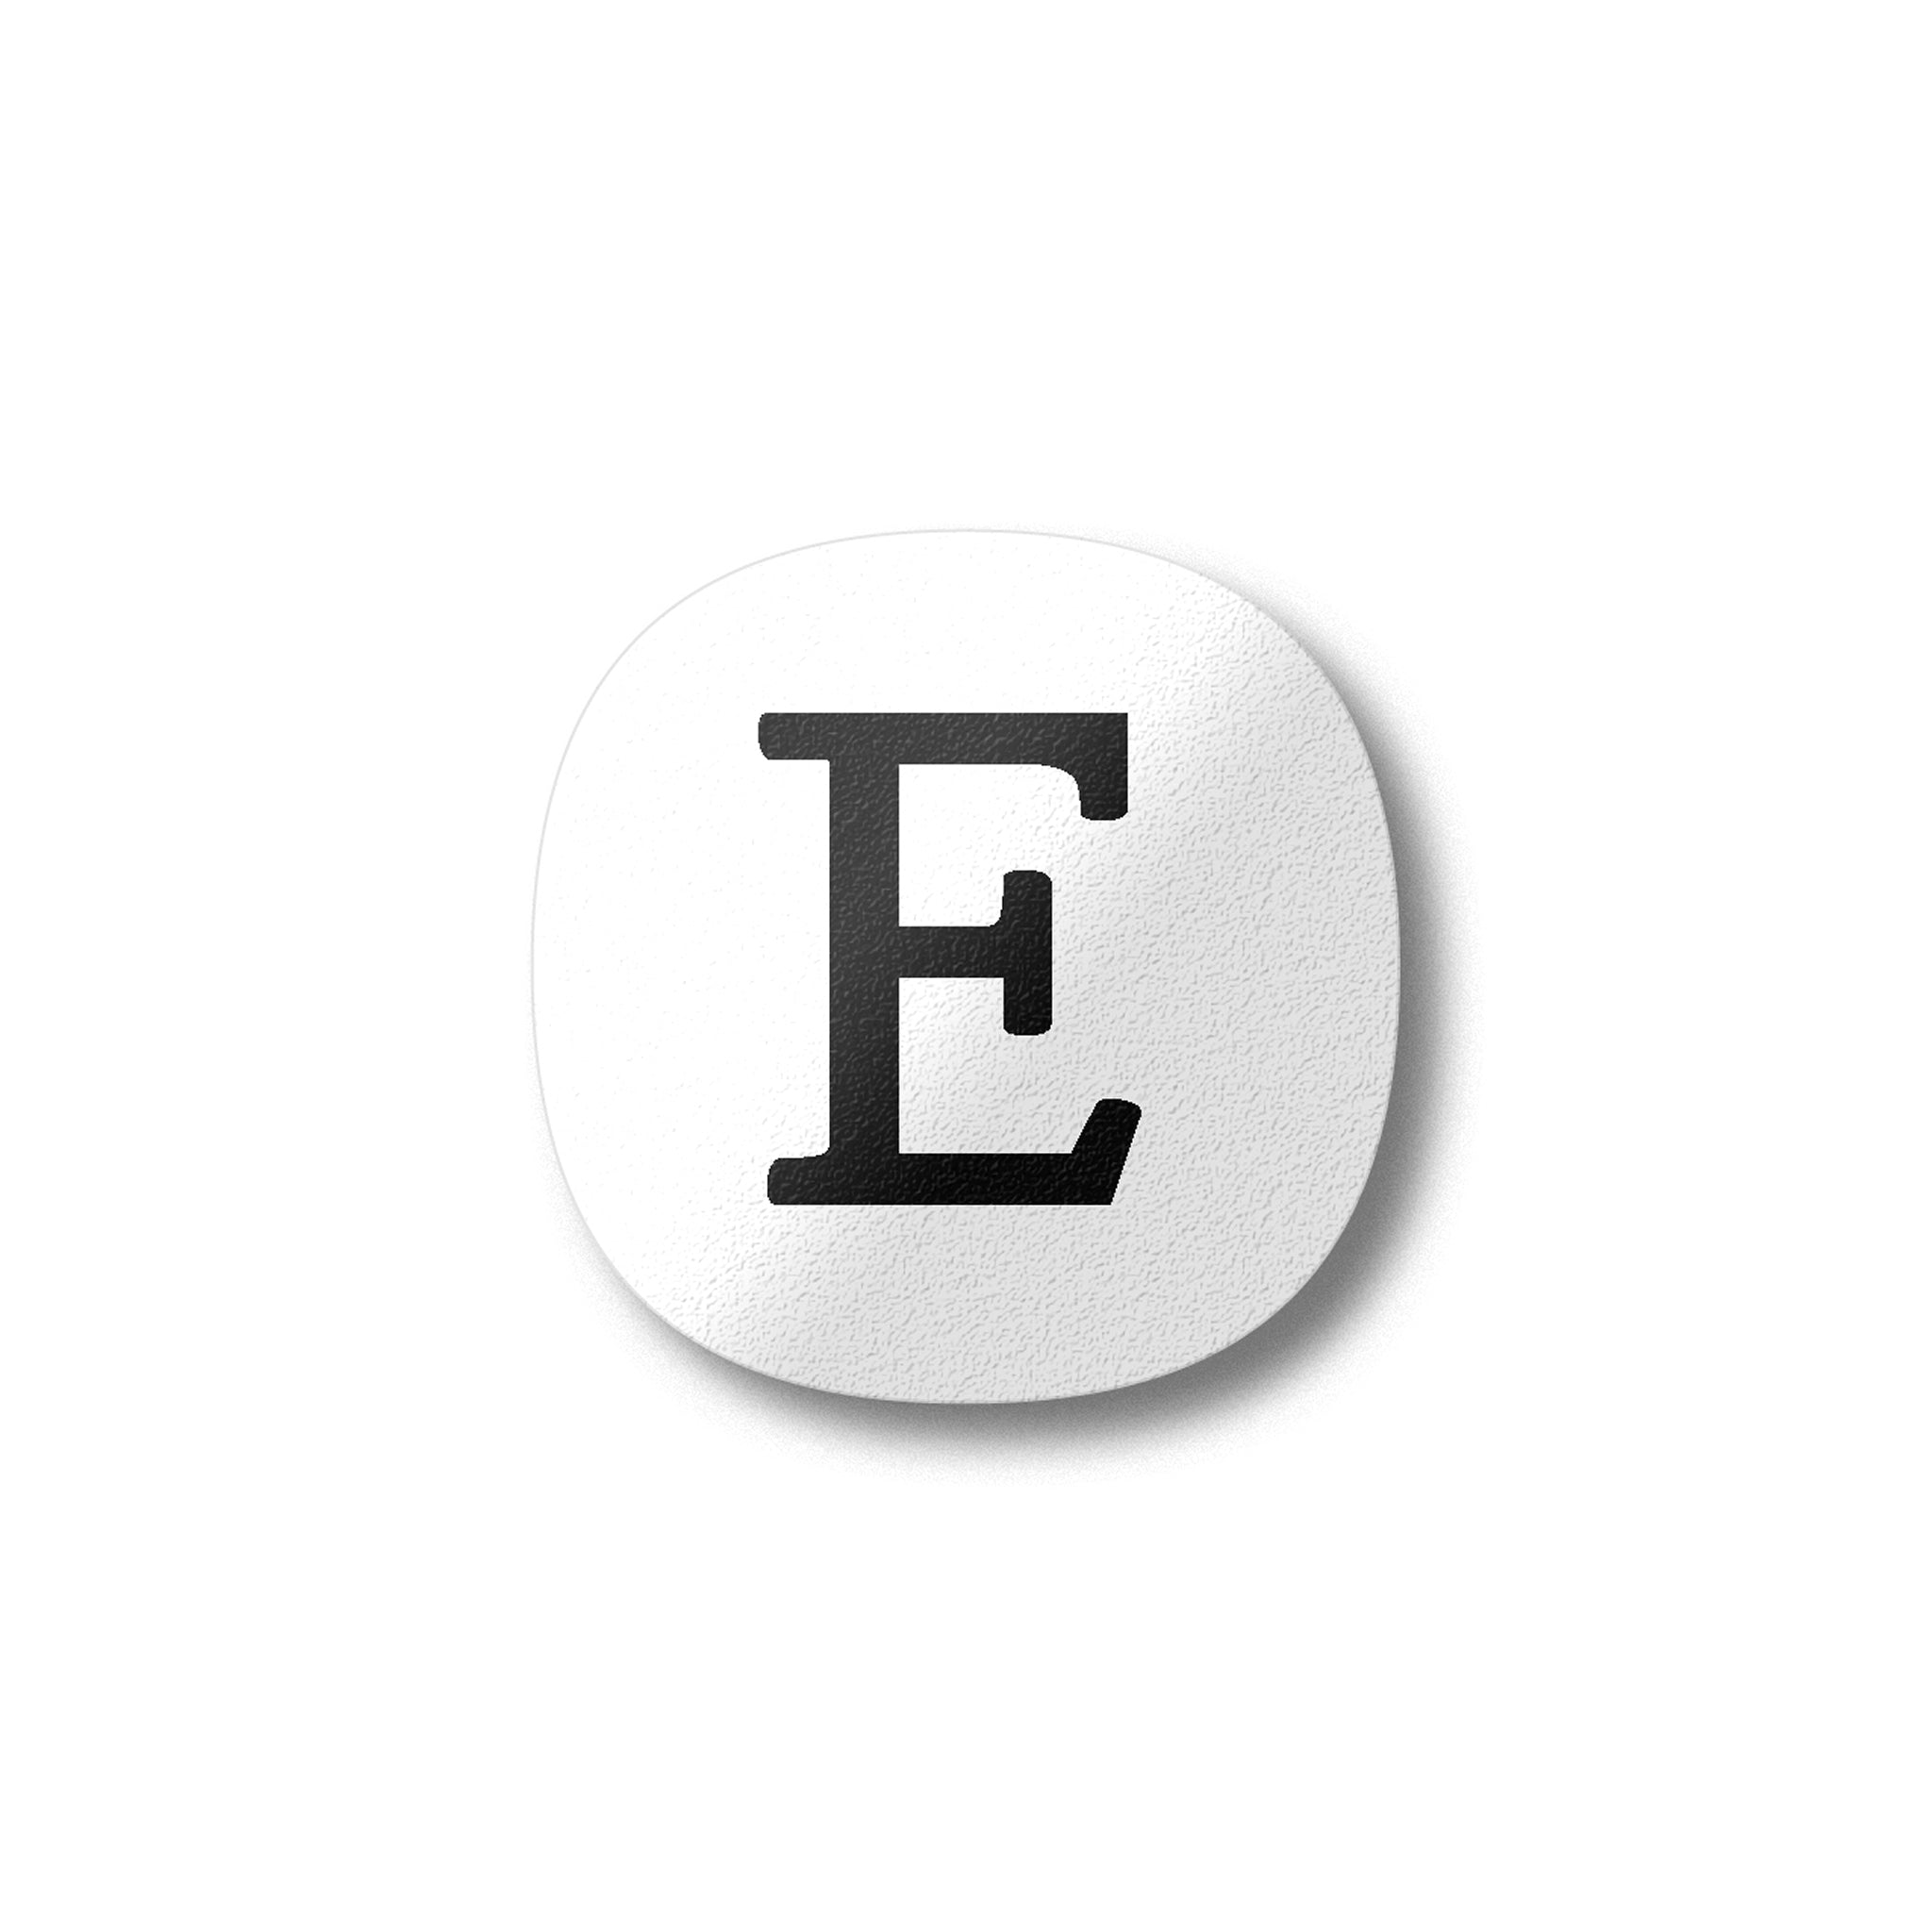 A white magnet with a black letter E plywood fridge magnet by Beyond the Fridge